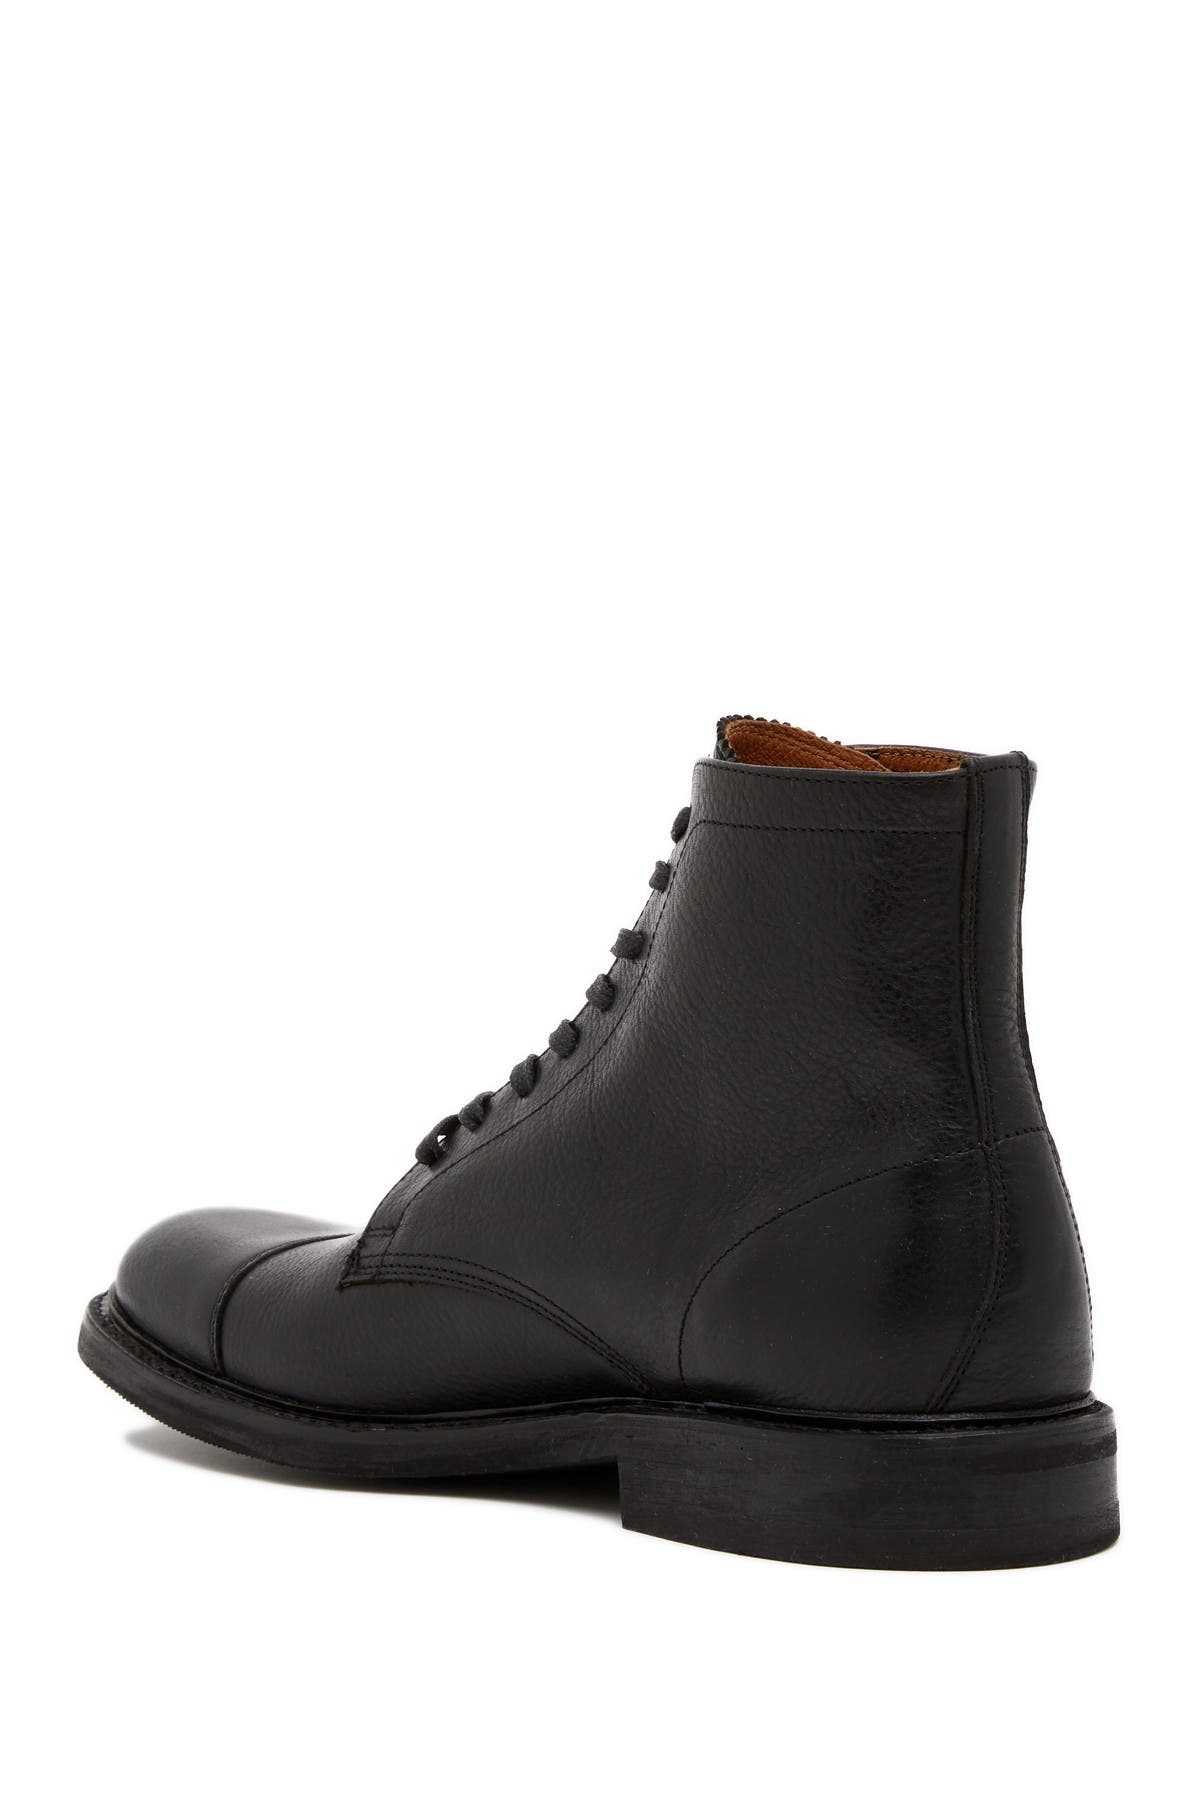 Frye | Seth Leather Lace-Up Boot | Nordstrom Rack